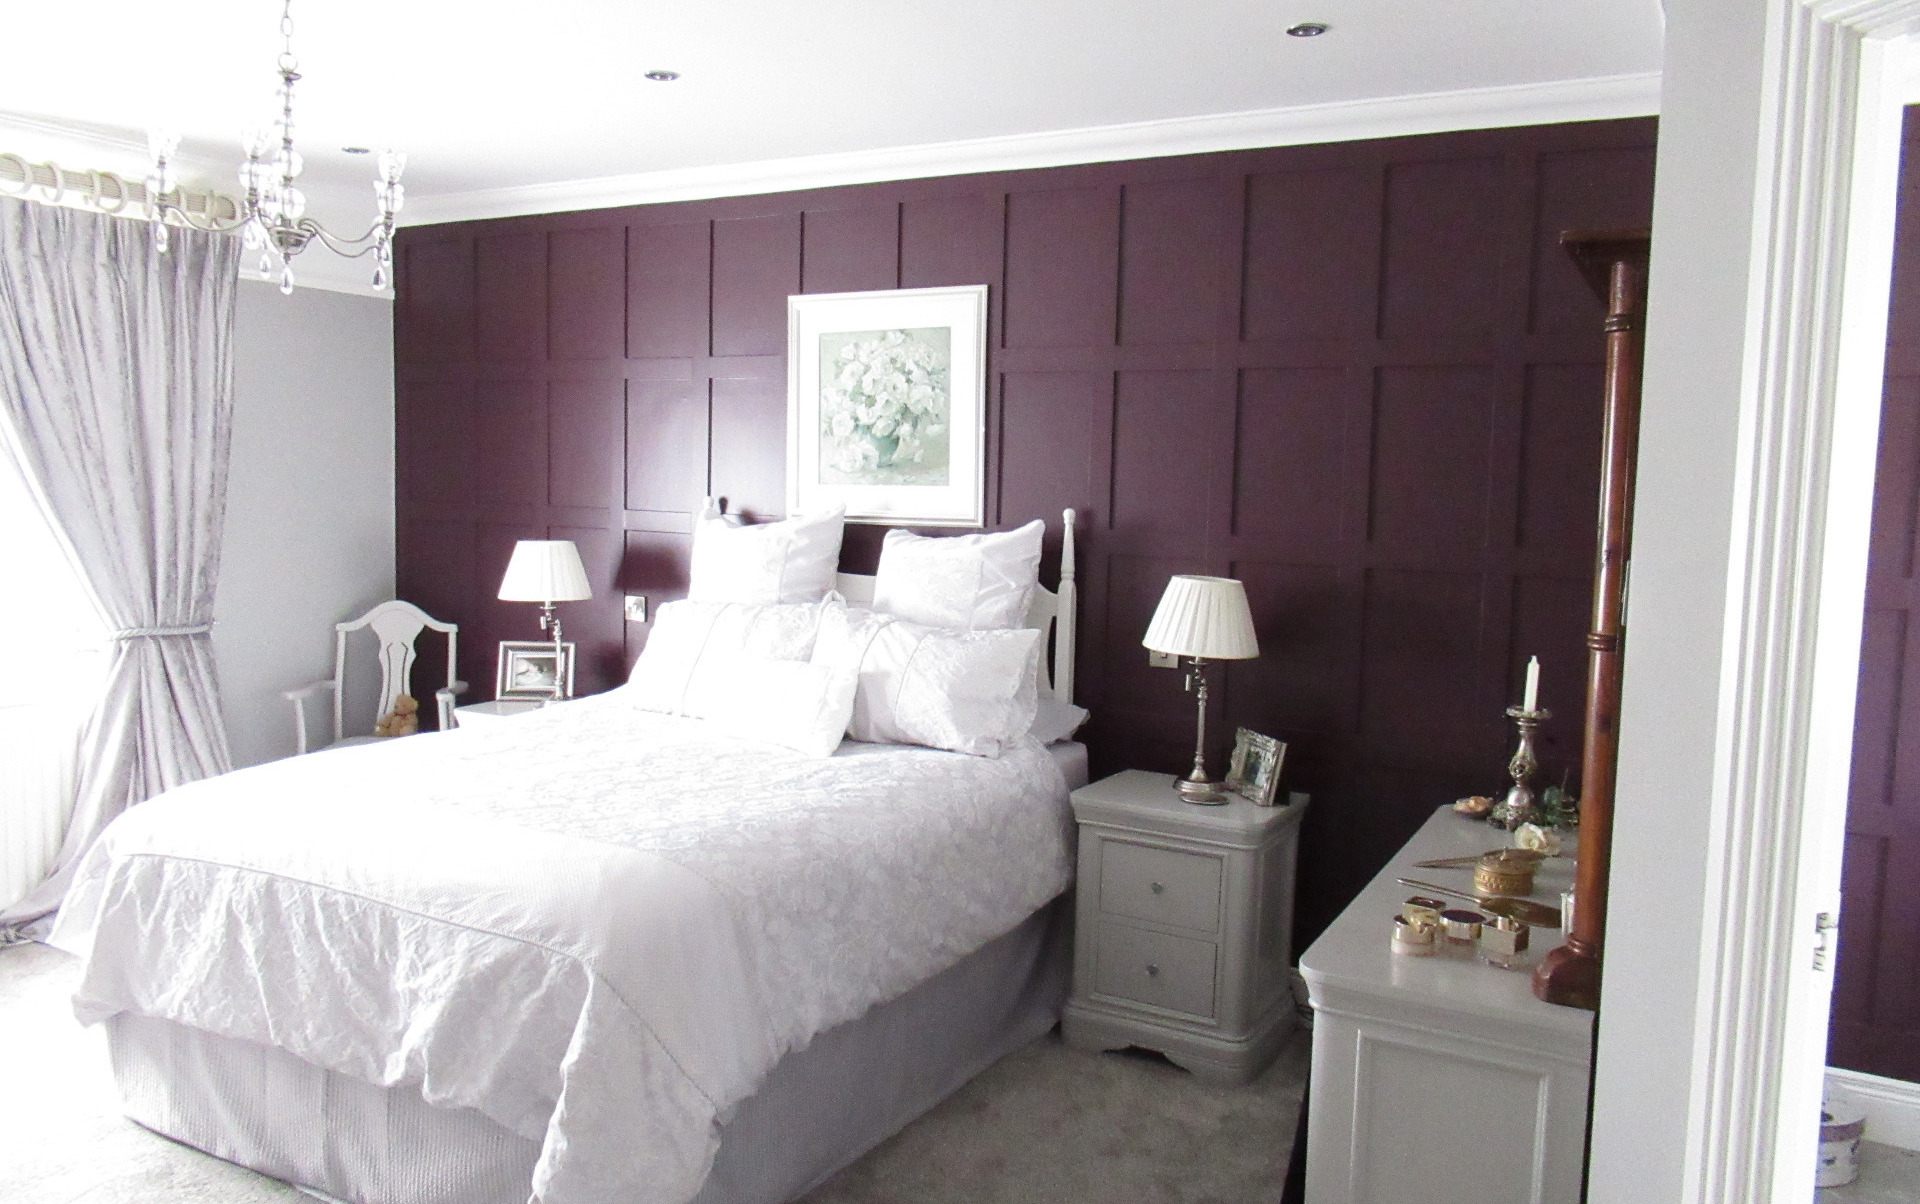 Bedroom renovation with wall panelling installed by Elite Building Services Swords